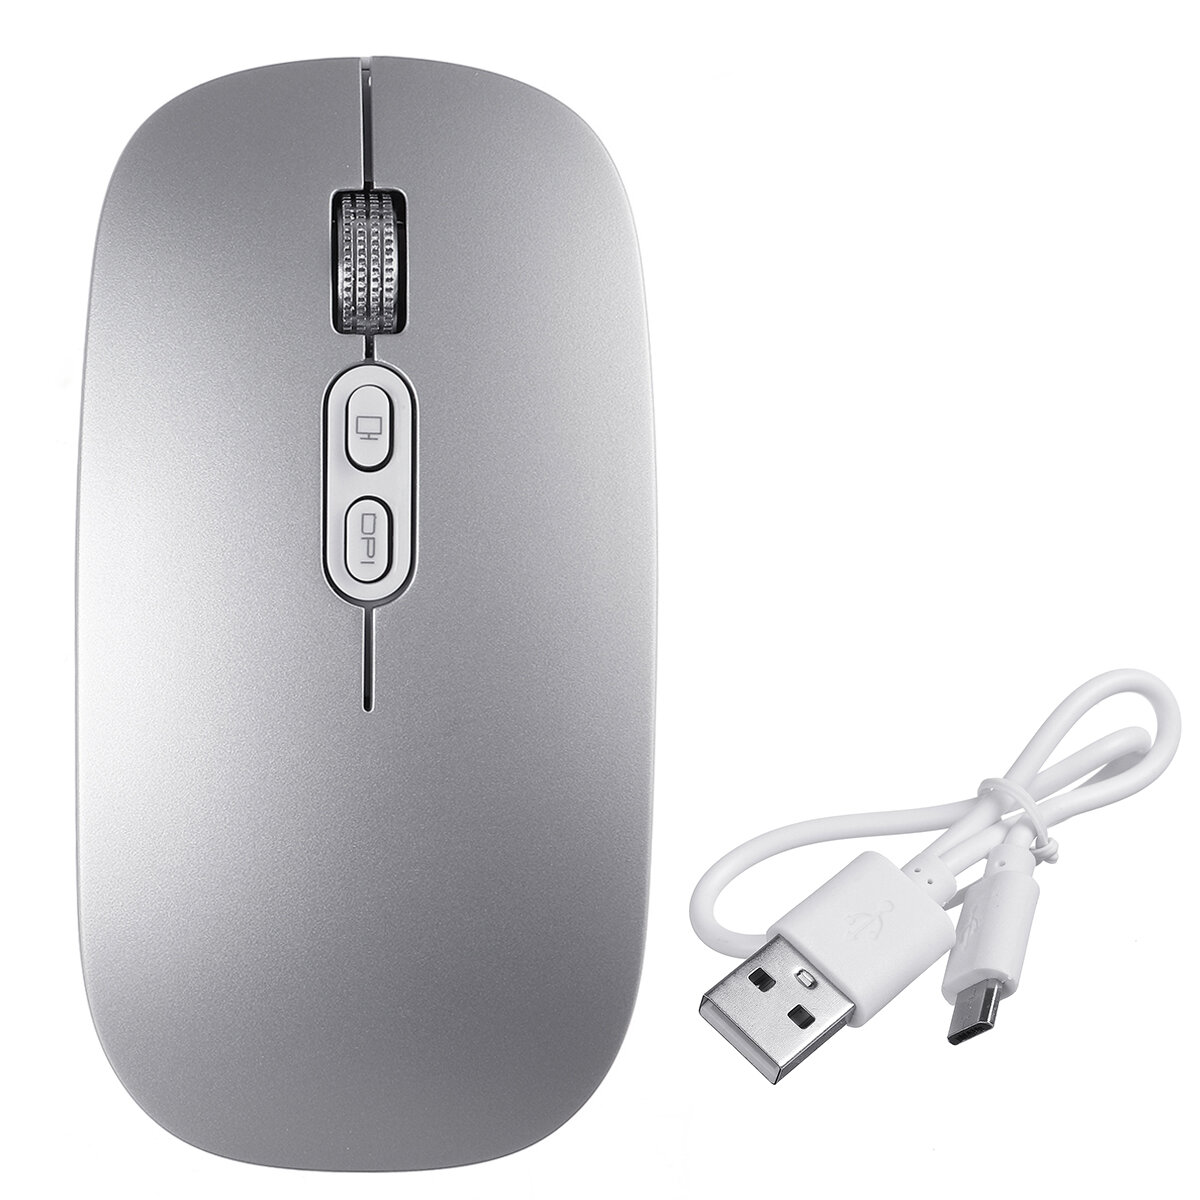 FMOUSE M103 Wireless Mouse 500mAh Dual Mode DPI Adjustable 2.4GHz bluetooth 5.0 Wireless USB Rechargeable Optical Mouse for PC Laptop Mobile Phone COD